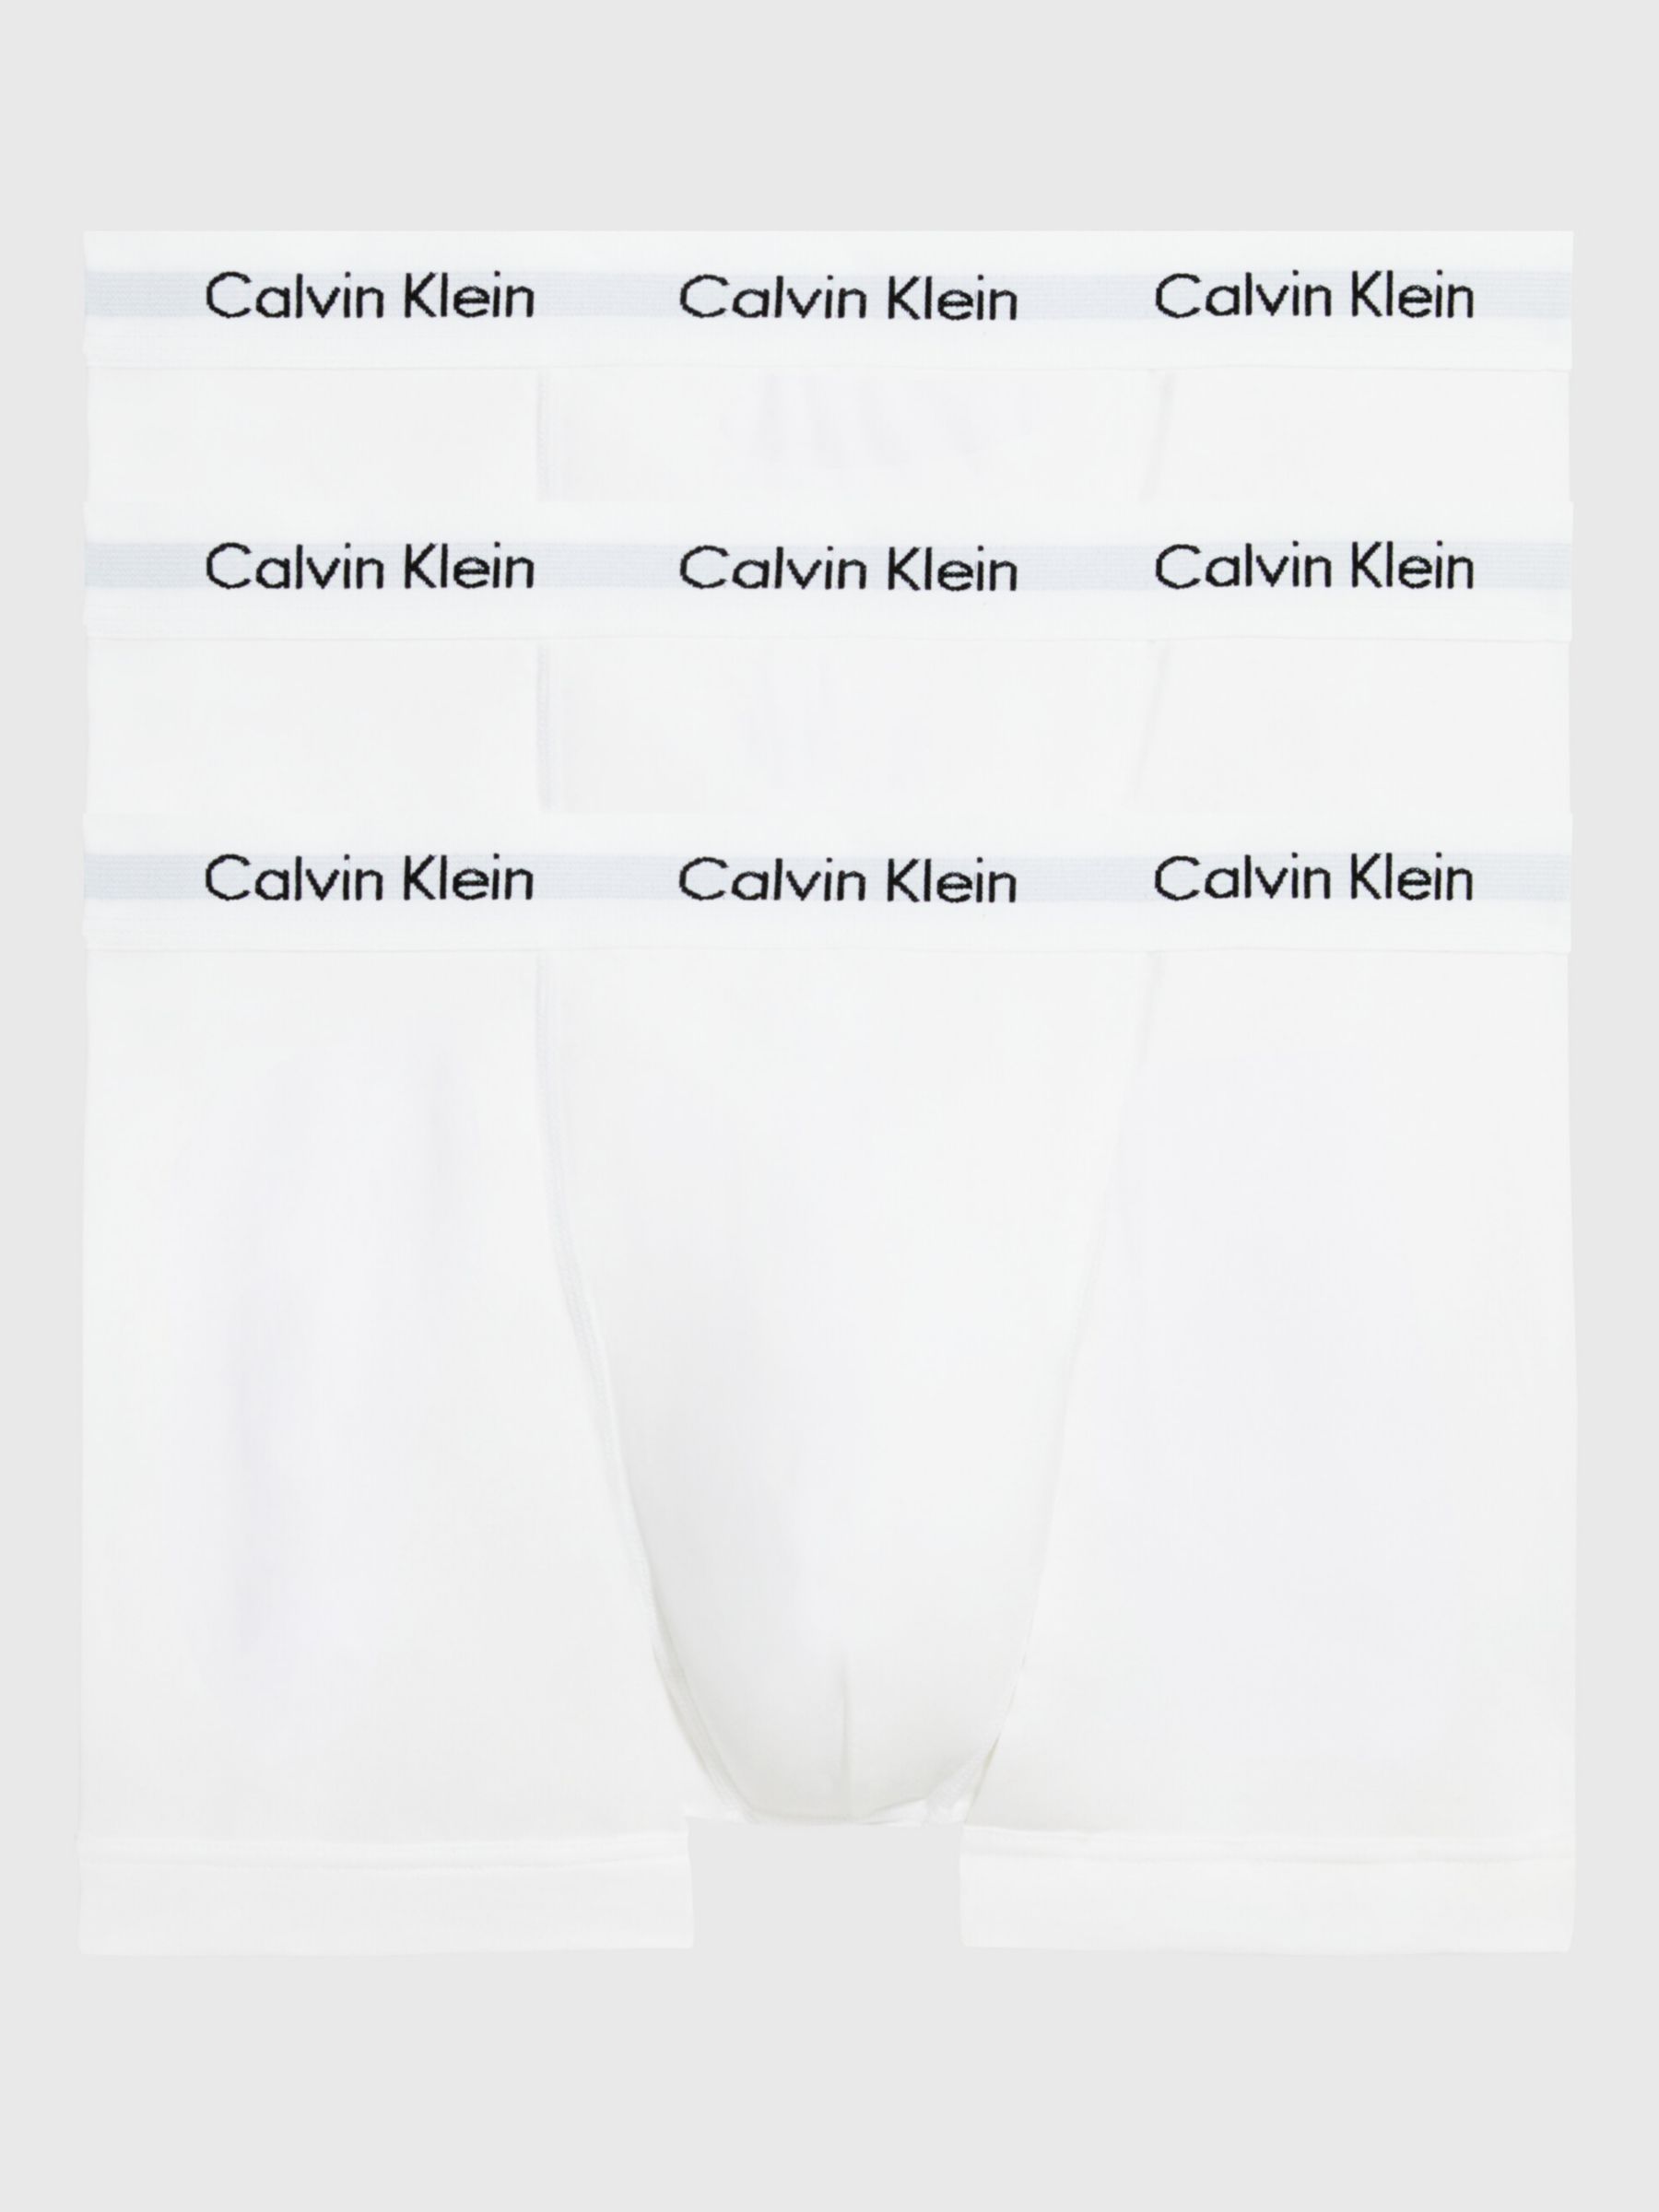 Calvin Klein Regular Cotton Stretch Trunks, Pack of 3, White at